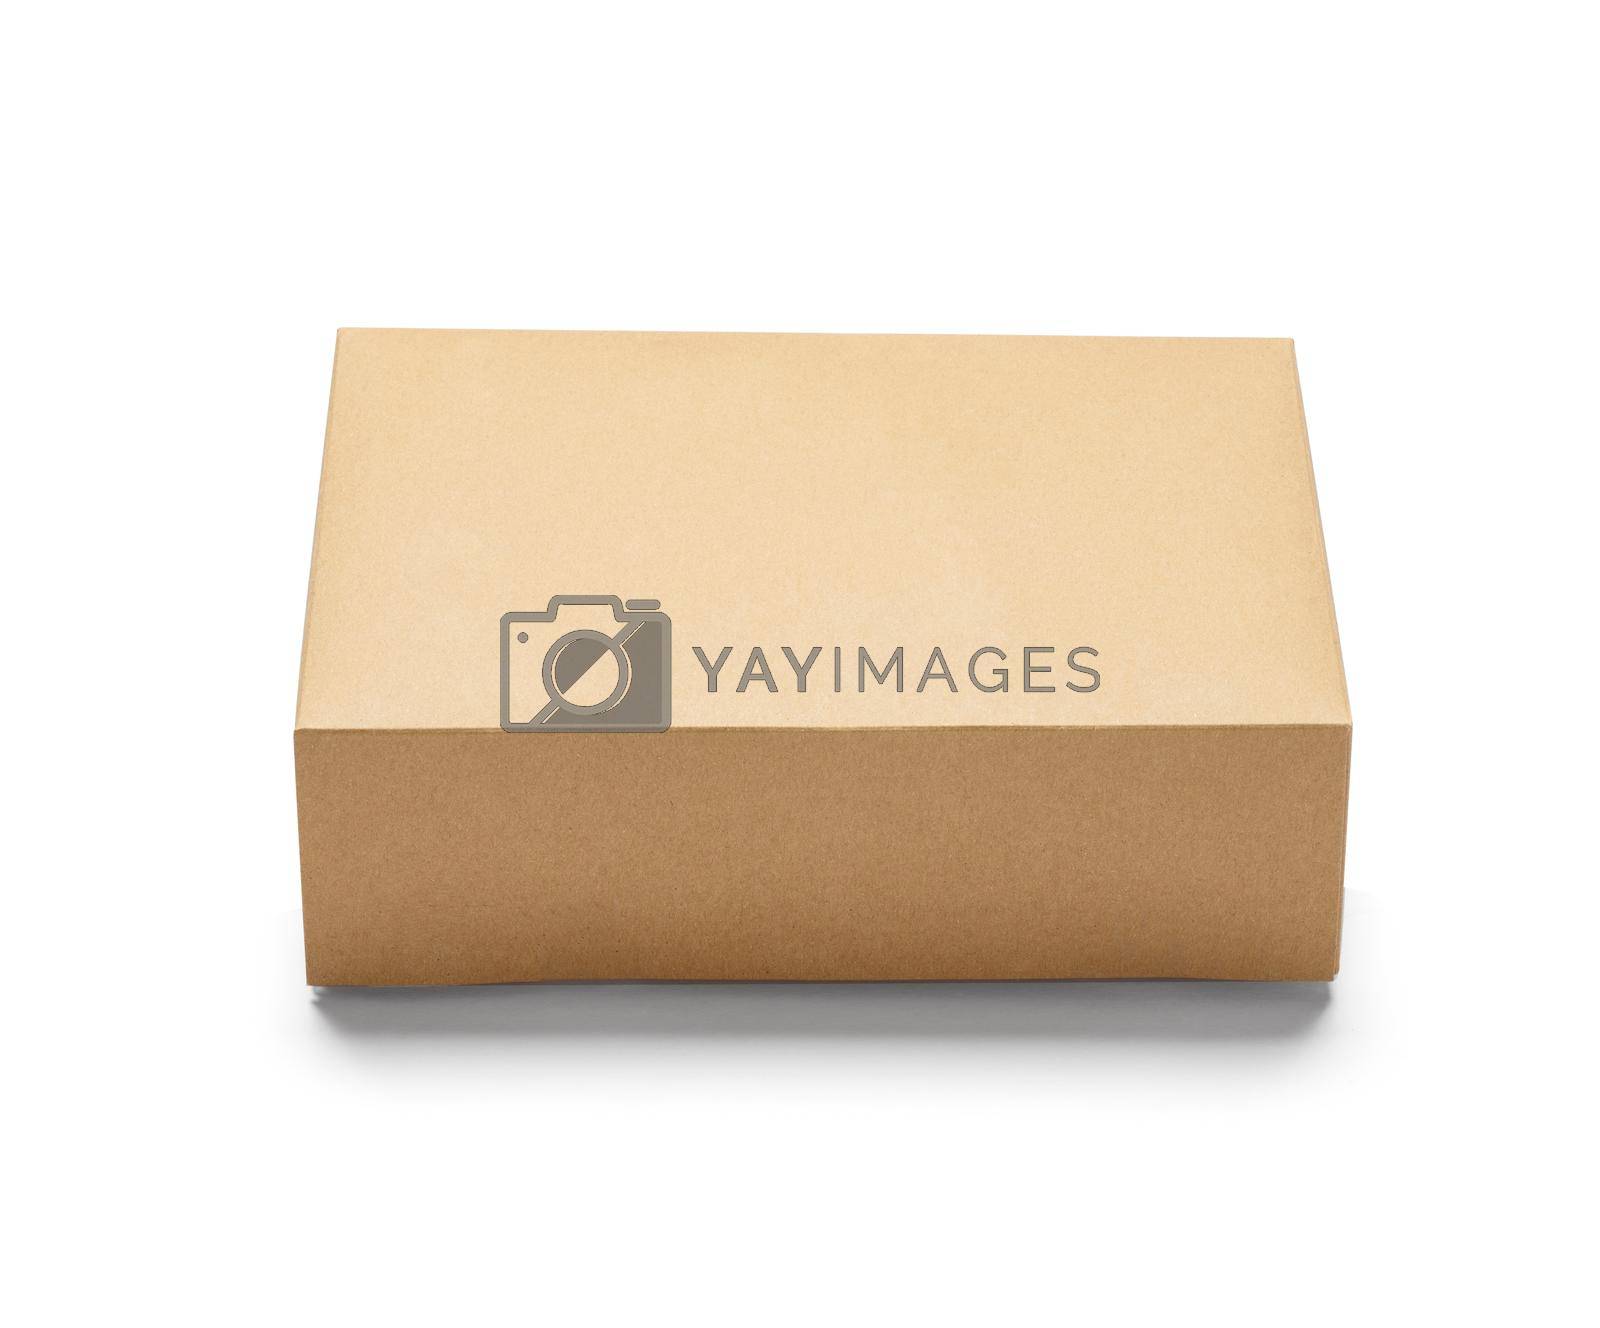 Royalty free image of box package delivery cardboard carton packaging pack gift container brown isolated present mail by Picsfive